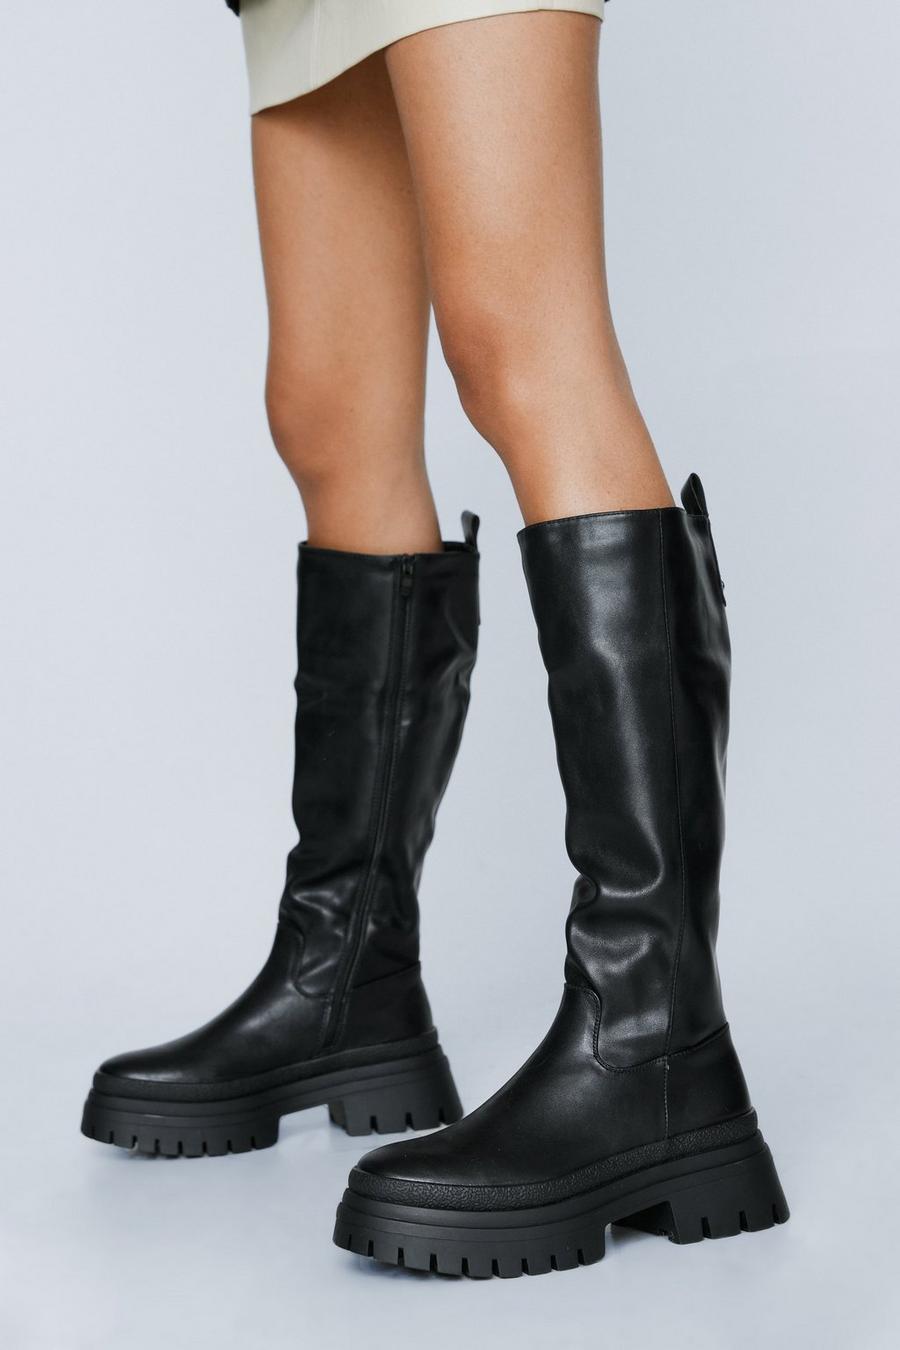 Over the Knee Boots | Thigh High Boots | Nasty Gal